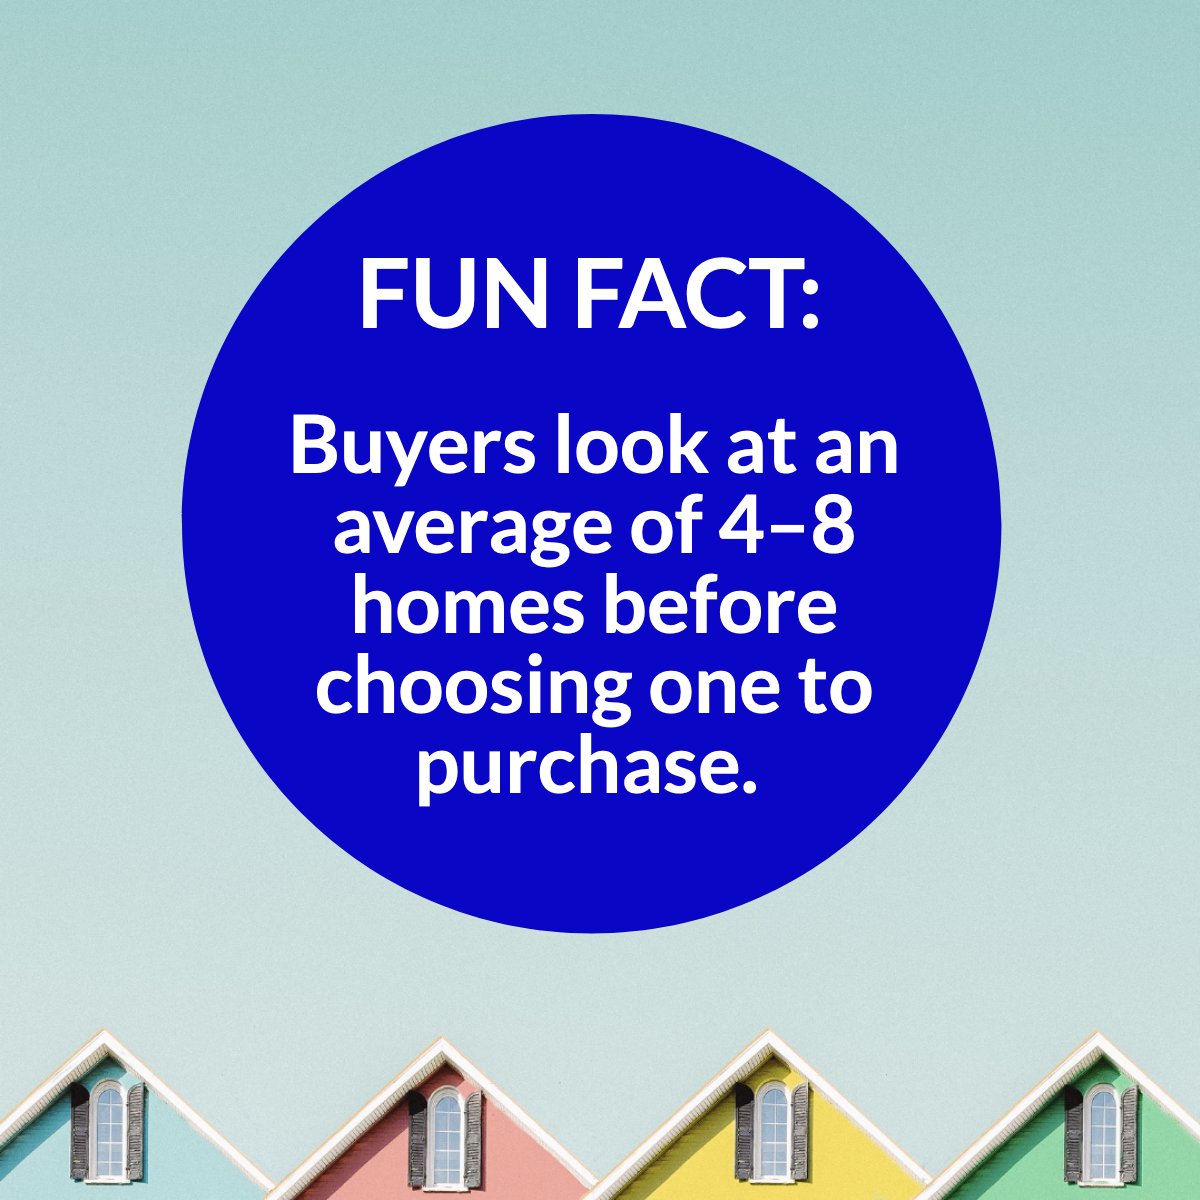 Fun Fact about buyers! 🏡 #realestatefacts #realestate #didyouknow #cherylcitro